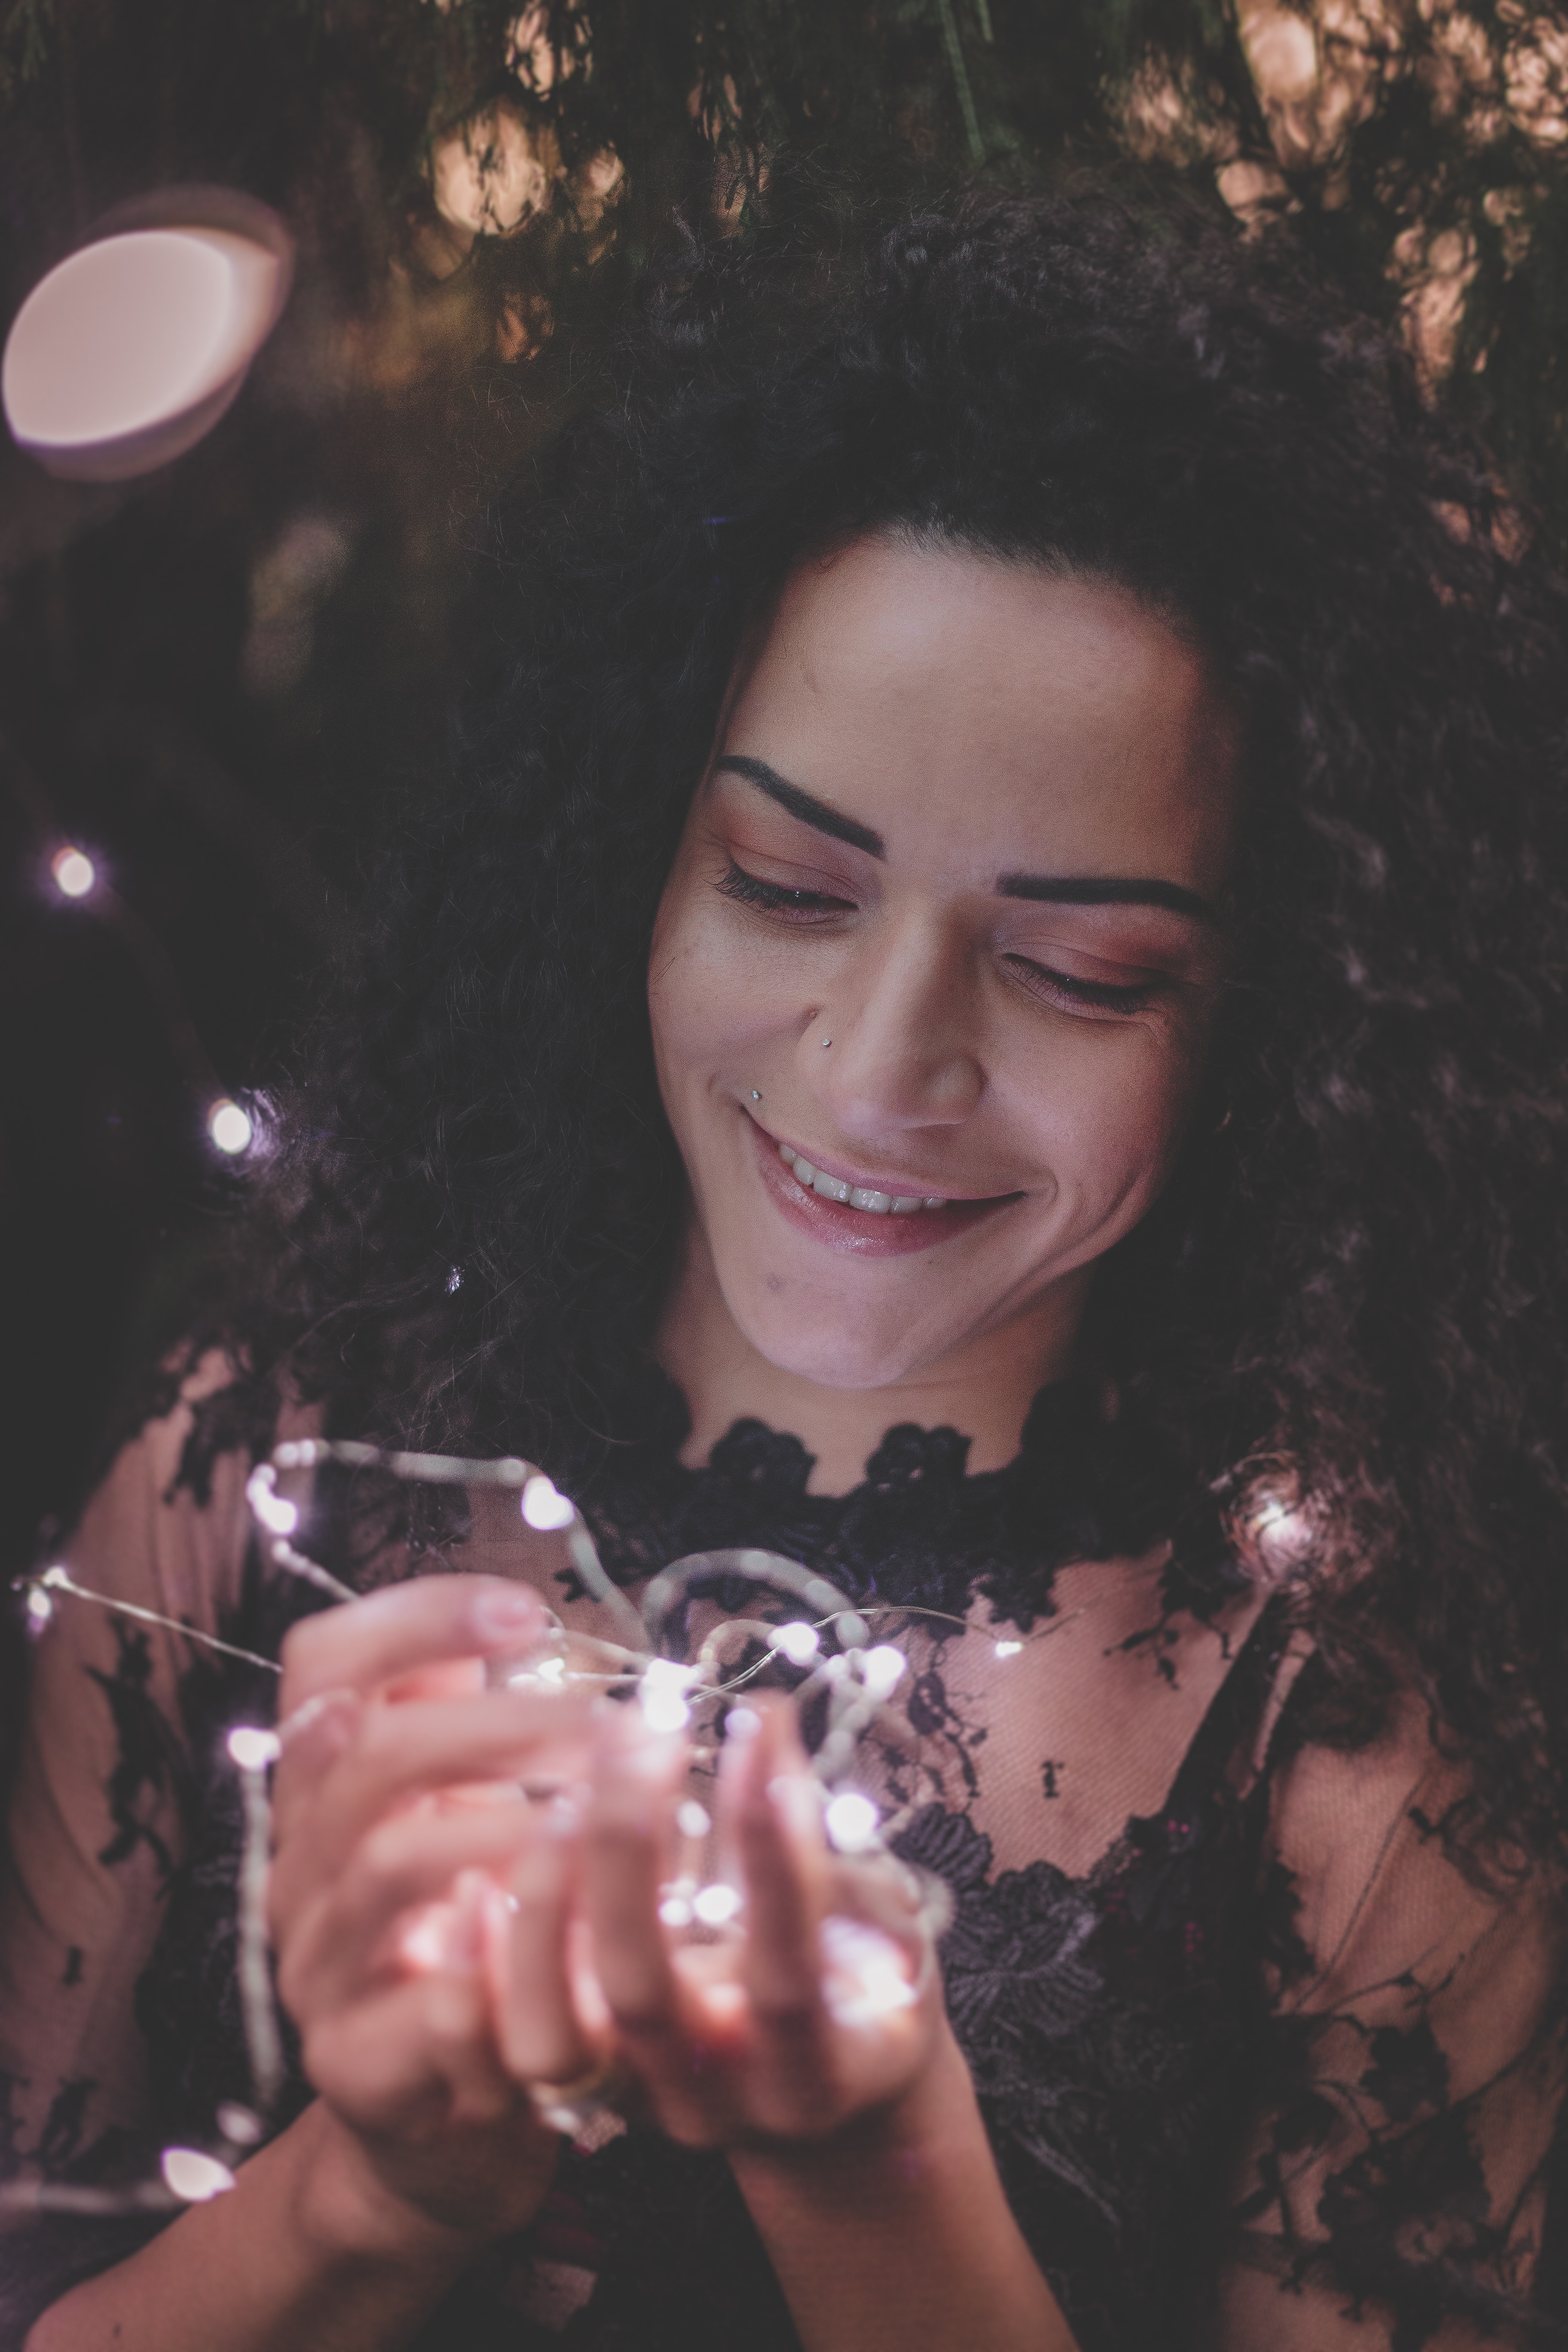 Woman holding string lights while smiling photo